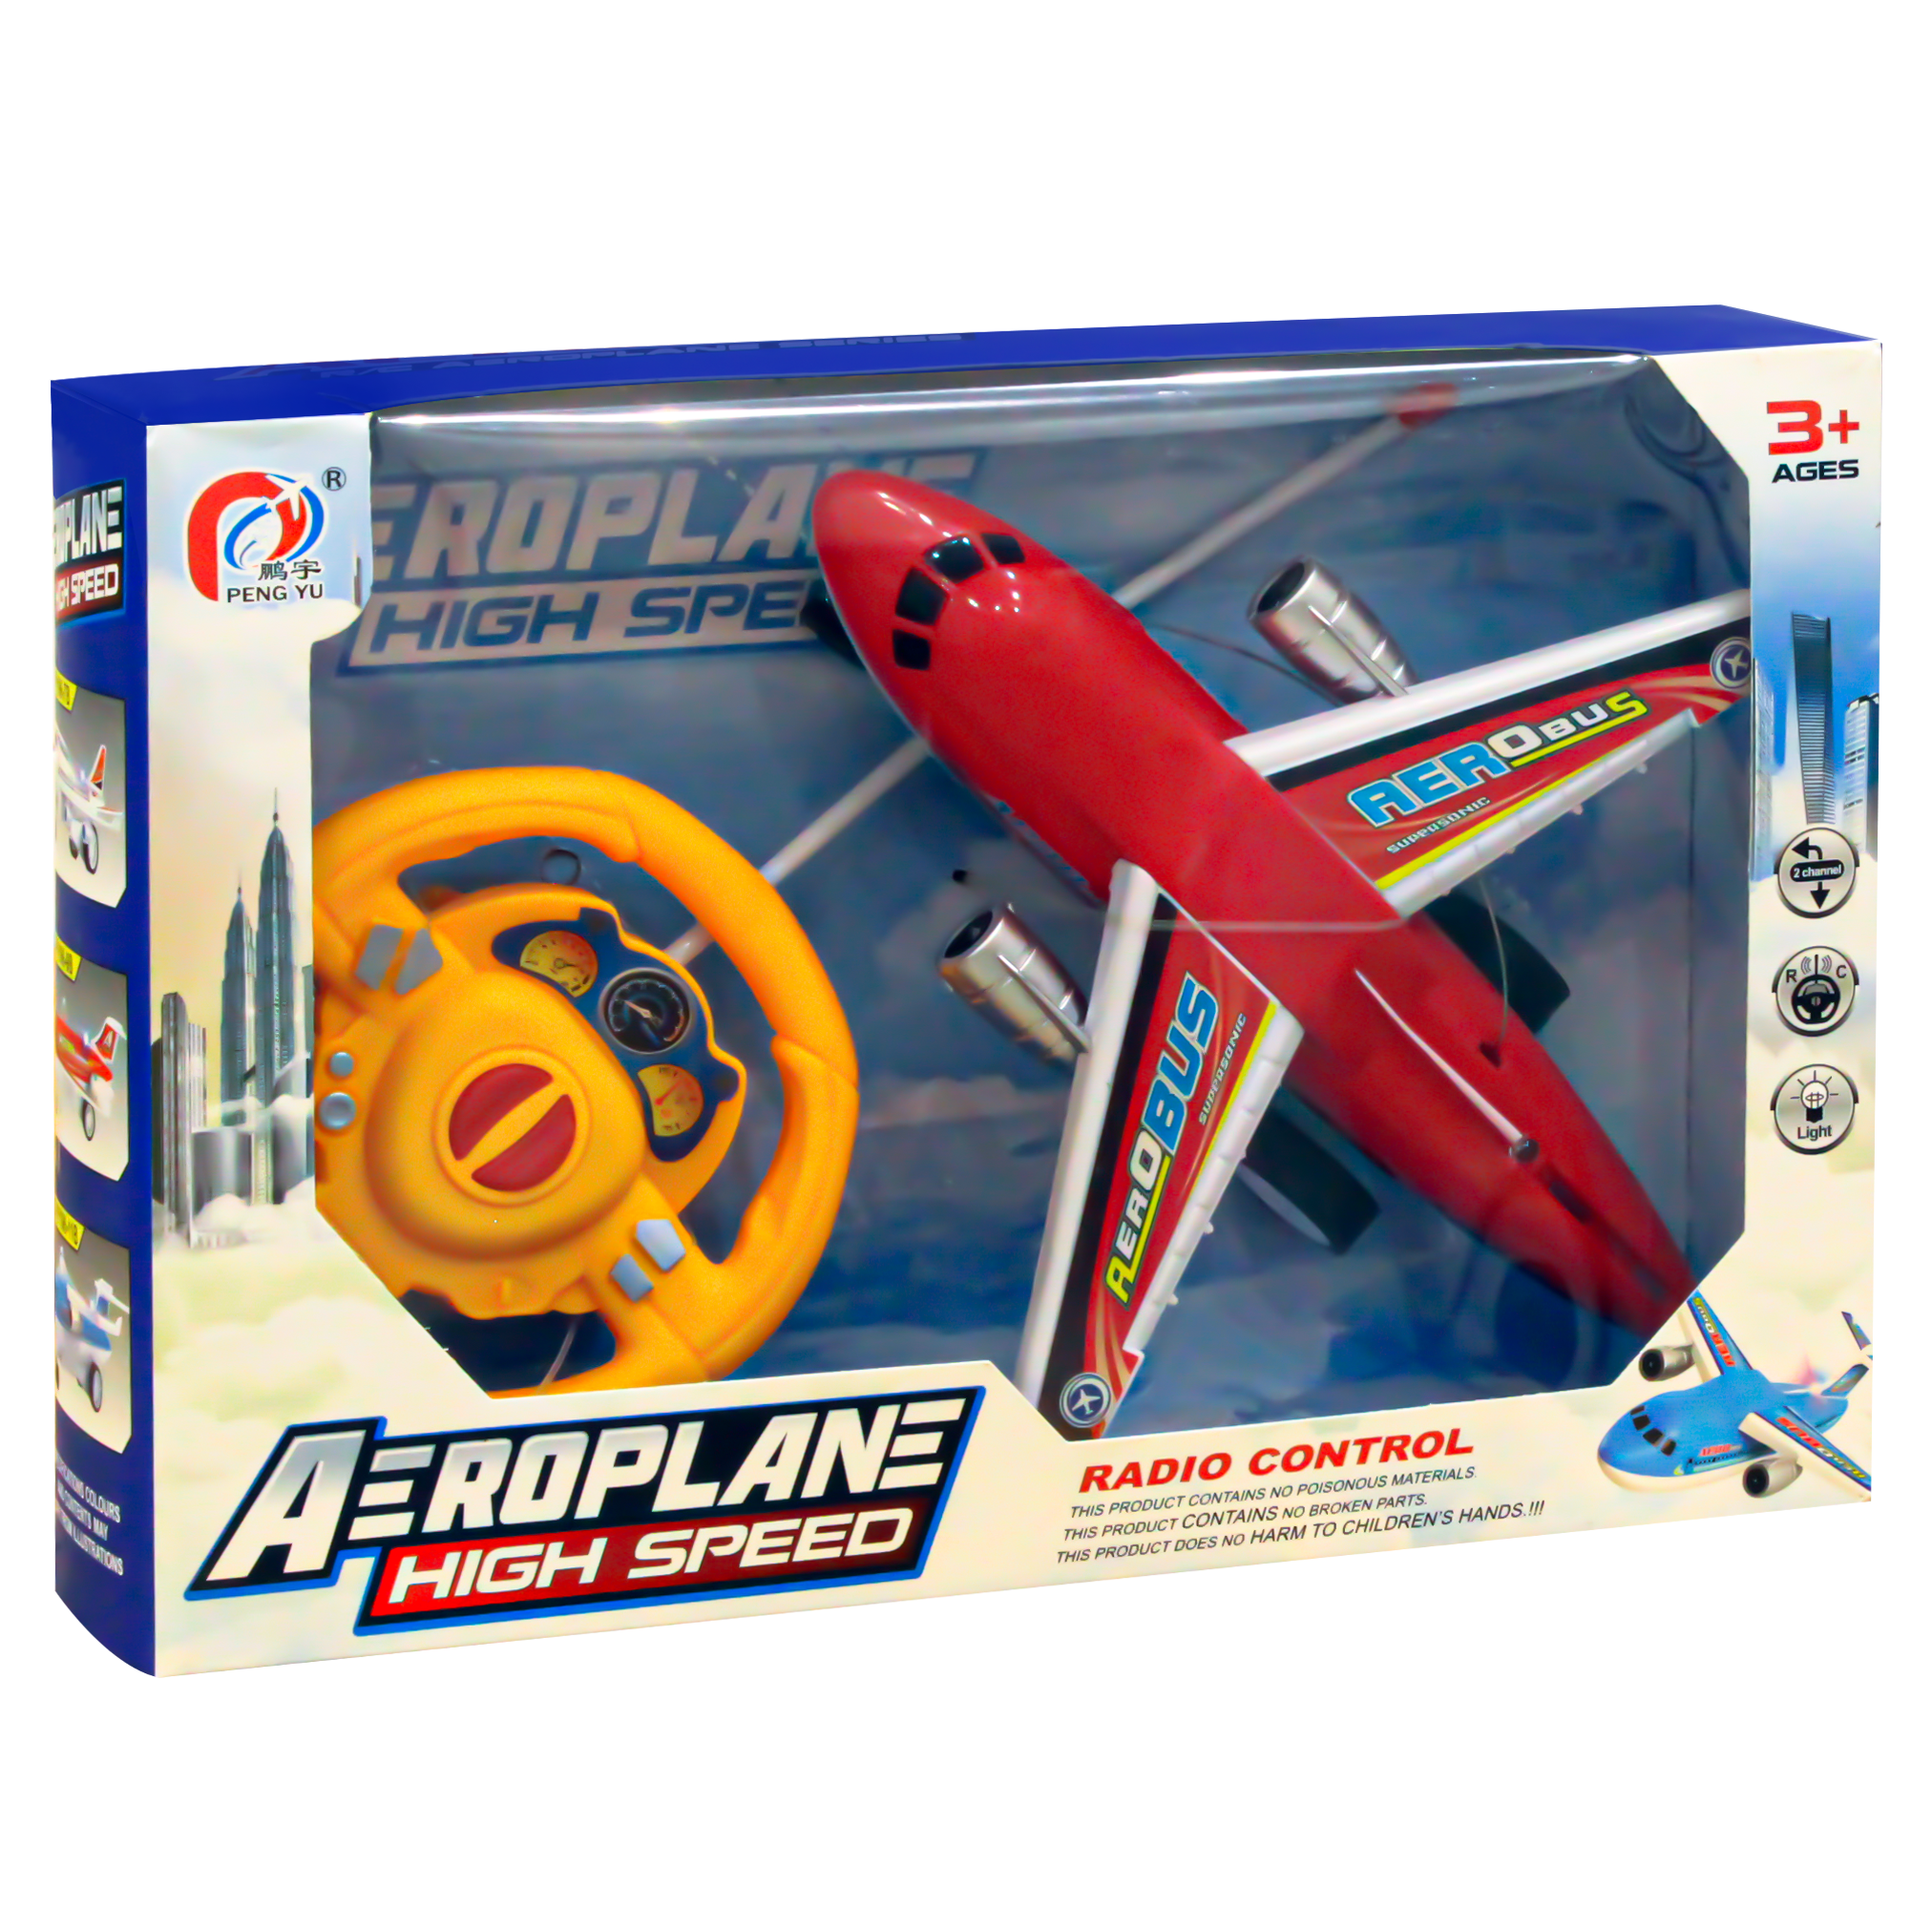 Aeroplane High Speed Remote Controlled Plane ( Color May vary )